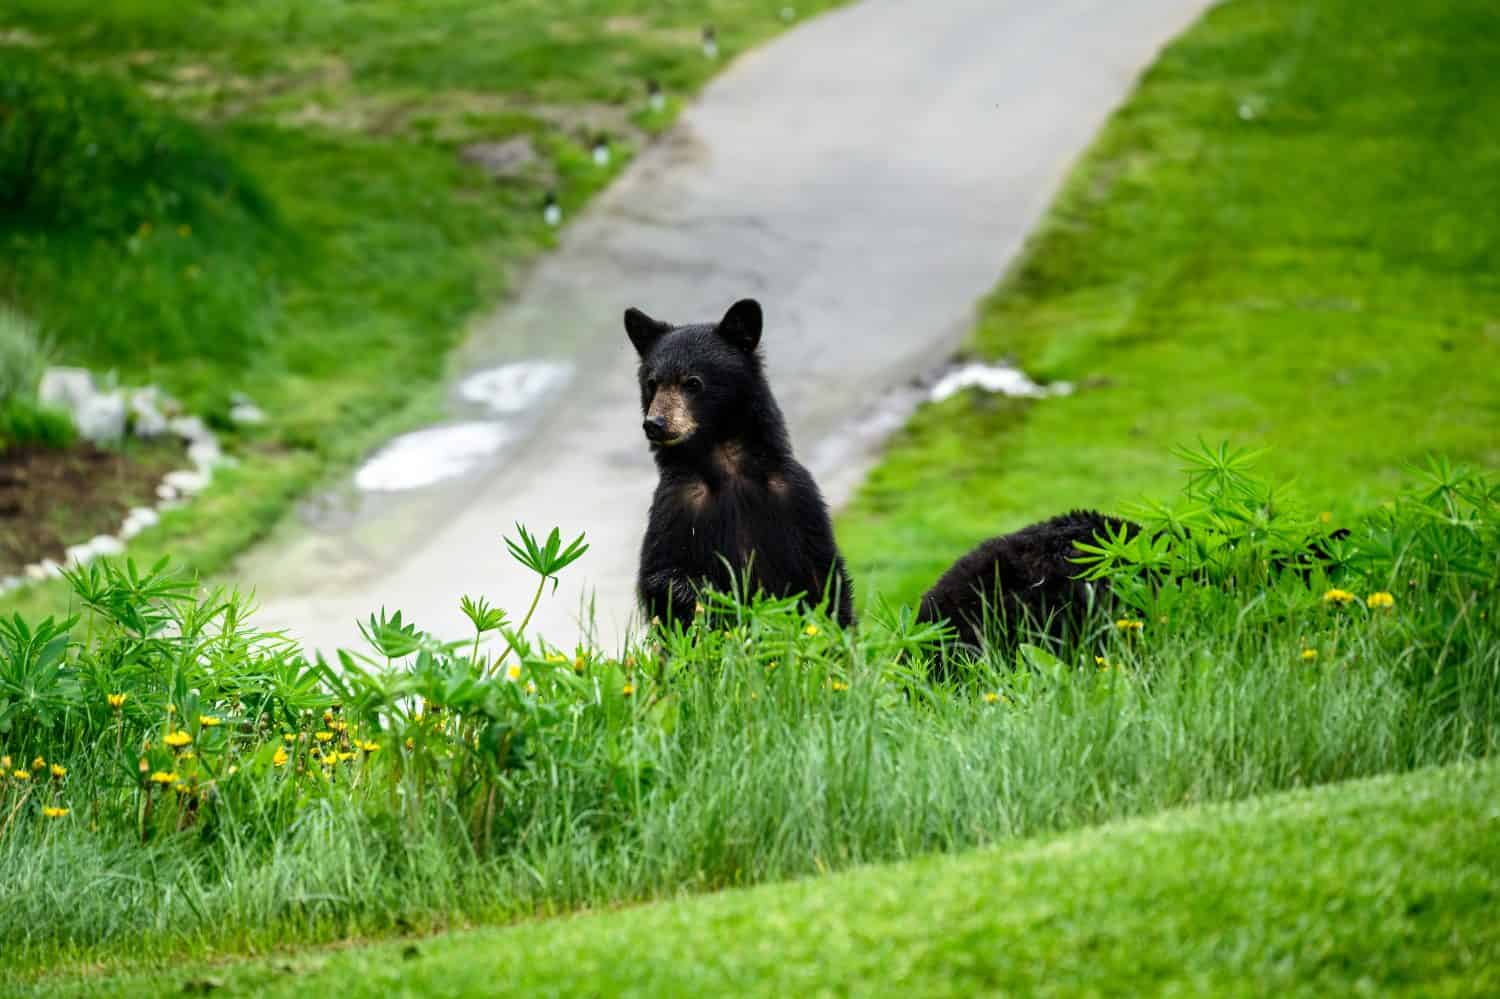 Two black bears grazing of dandelions on a mountain golf course, nature background